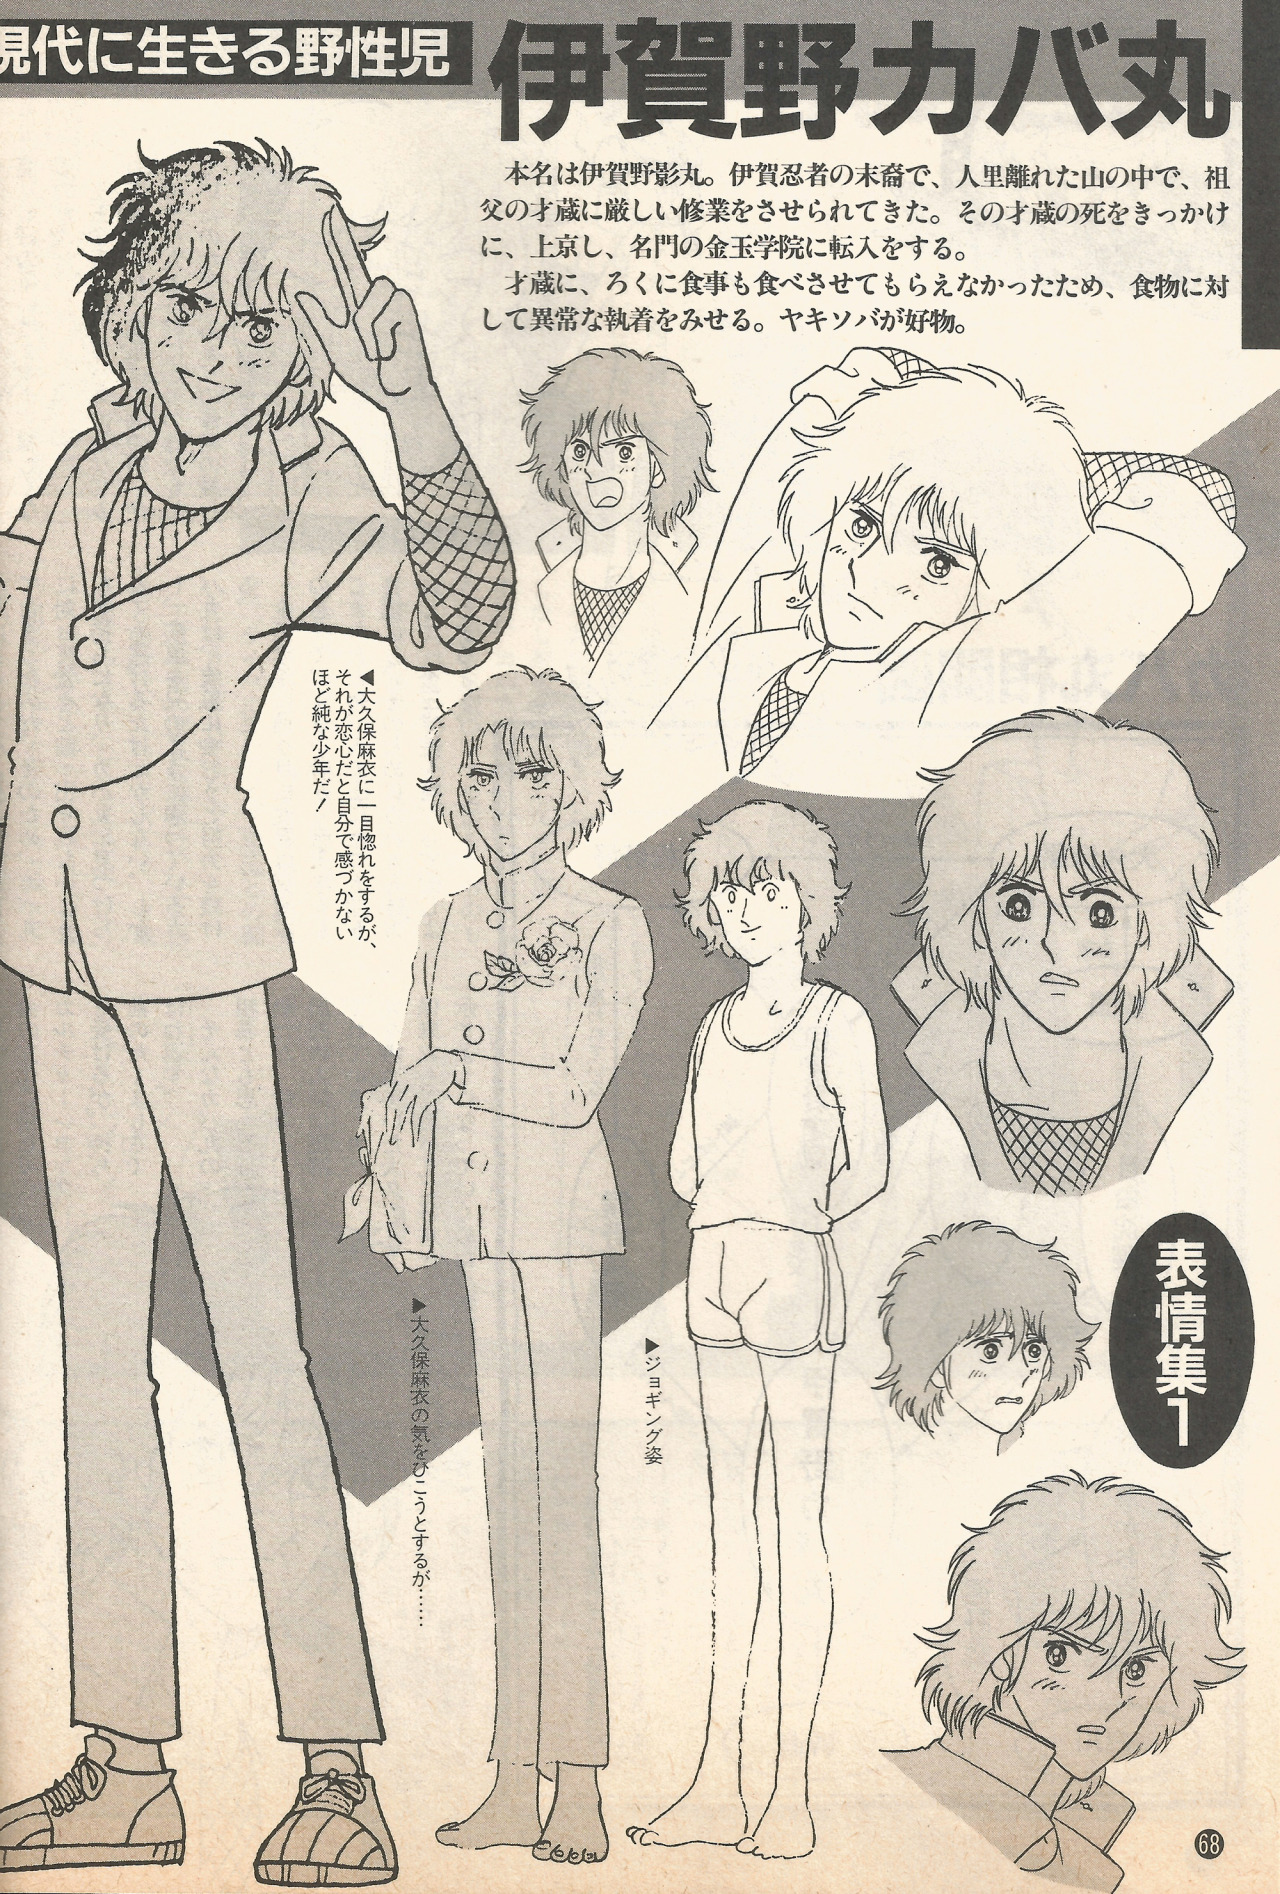 Igano Kabamaru model sheet by Akio Hosoya, scanned from Animedia, Decemeber 1983 issue. I’ve never seen these before, so I was really eager to share them! Hosoya doesn’t do Yu Azuki’s art justice, but his style is still very cute. Kabamaru just looks...